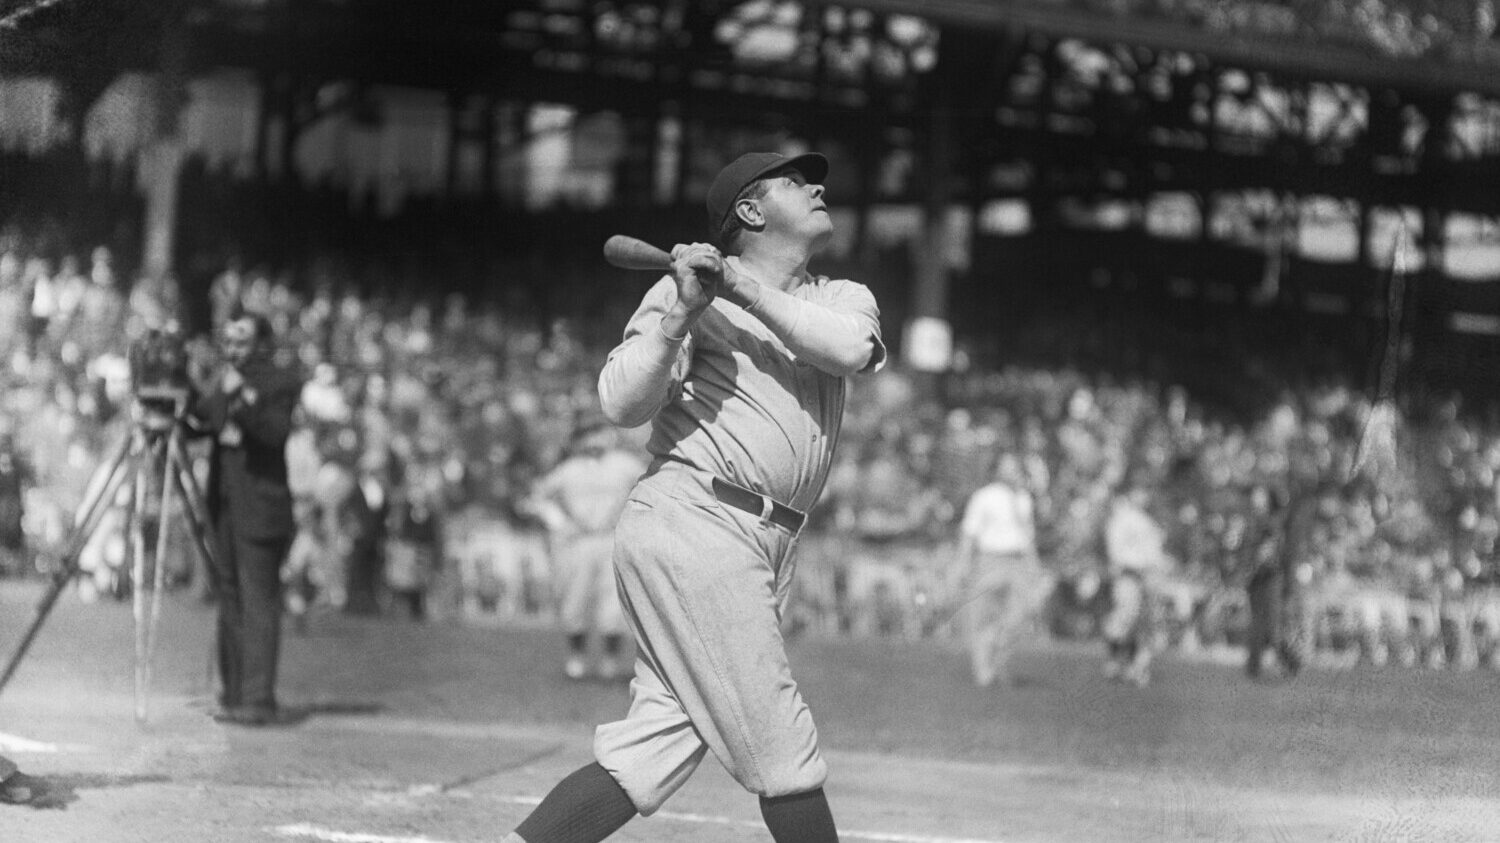 Vintage Babe Ruth jersey sells for record $5.64 million 